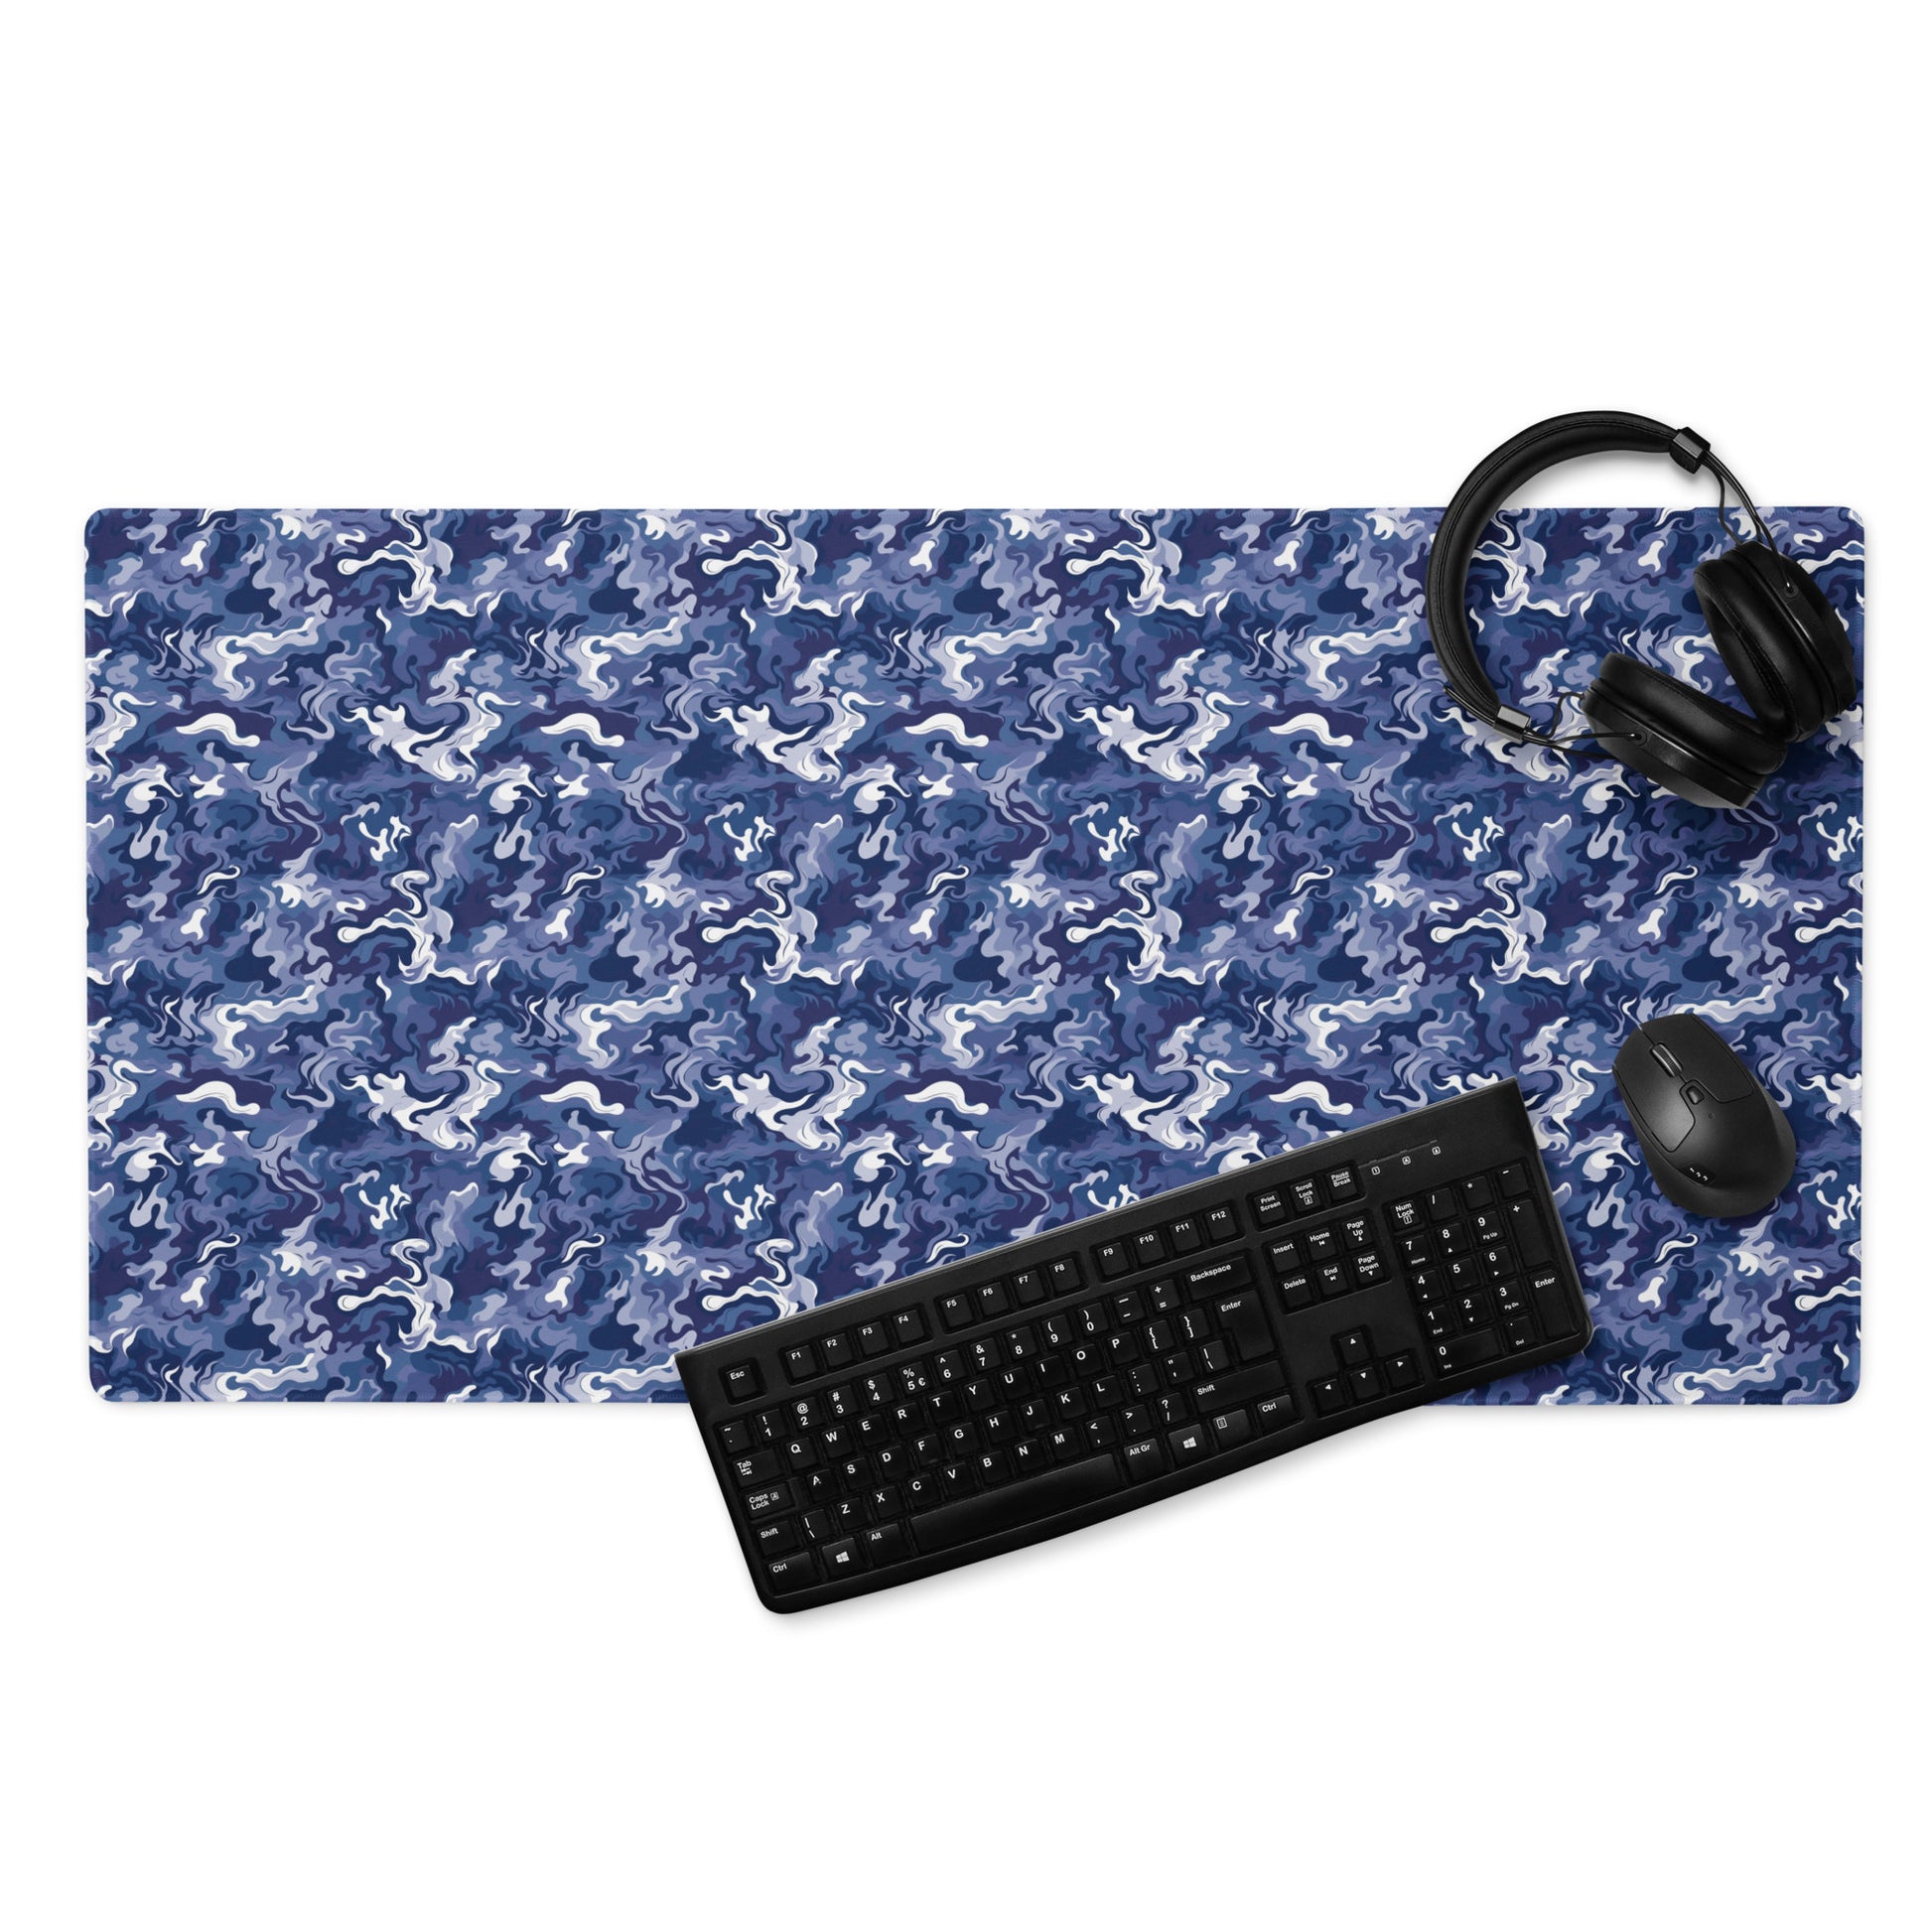 A 36" x 18" desk pad with a royal blue and white camo pattern. With a keyboard, mouse, and headphones sitting on it.